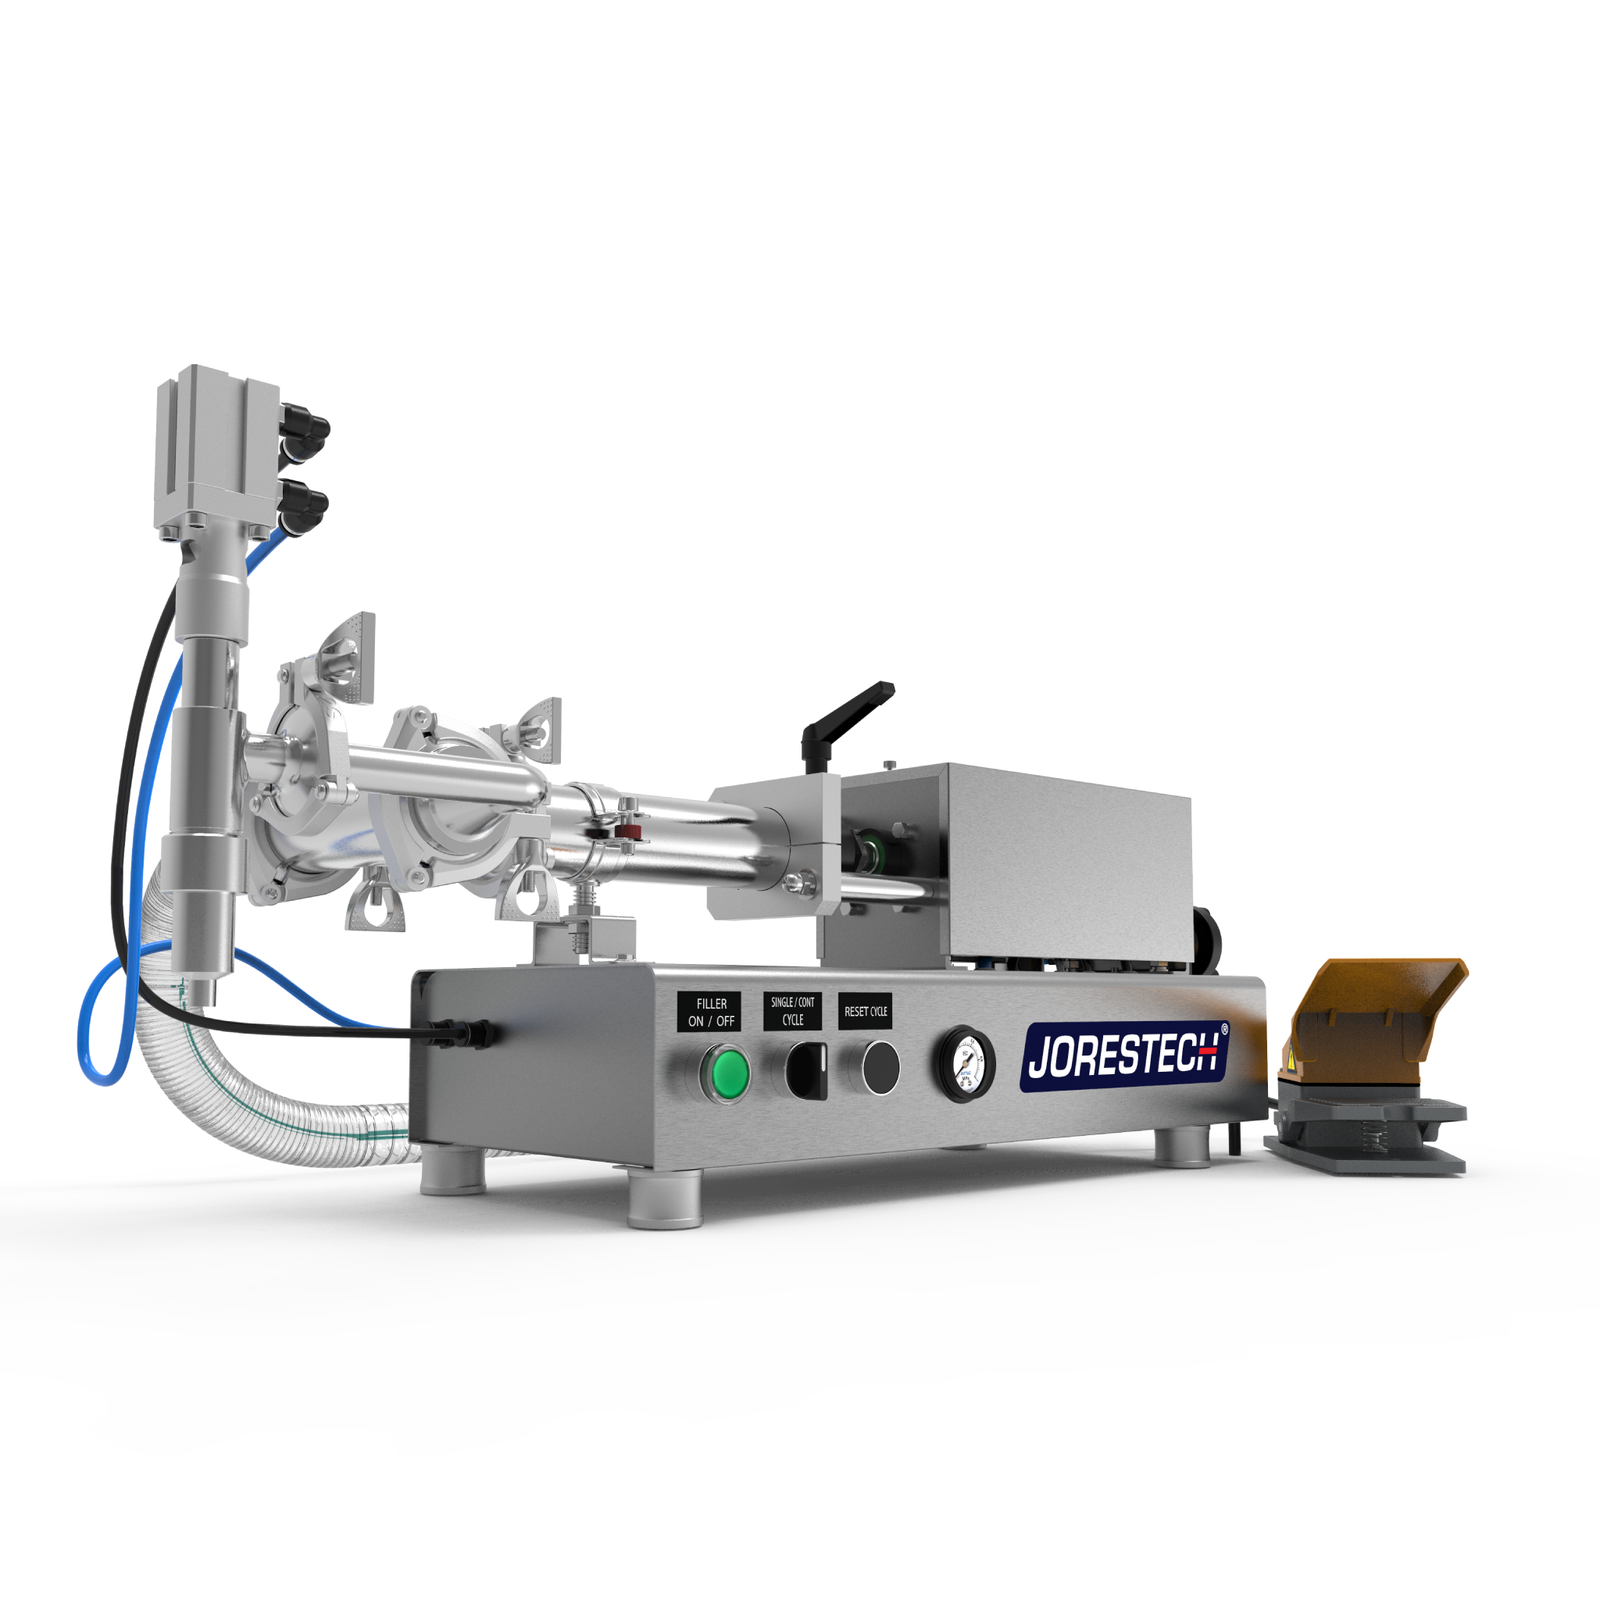 Countertop low viscosity piston filling machine by JORES TECHNOLOGIES®. The piston filler is made out of stainless steel and there's a yellow and grey foot pedal resting on the side.